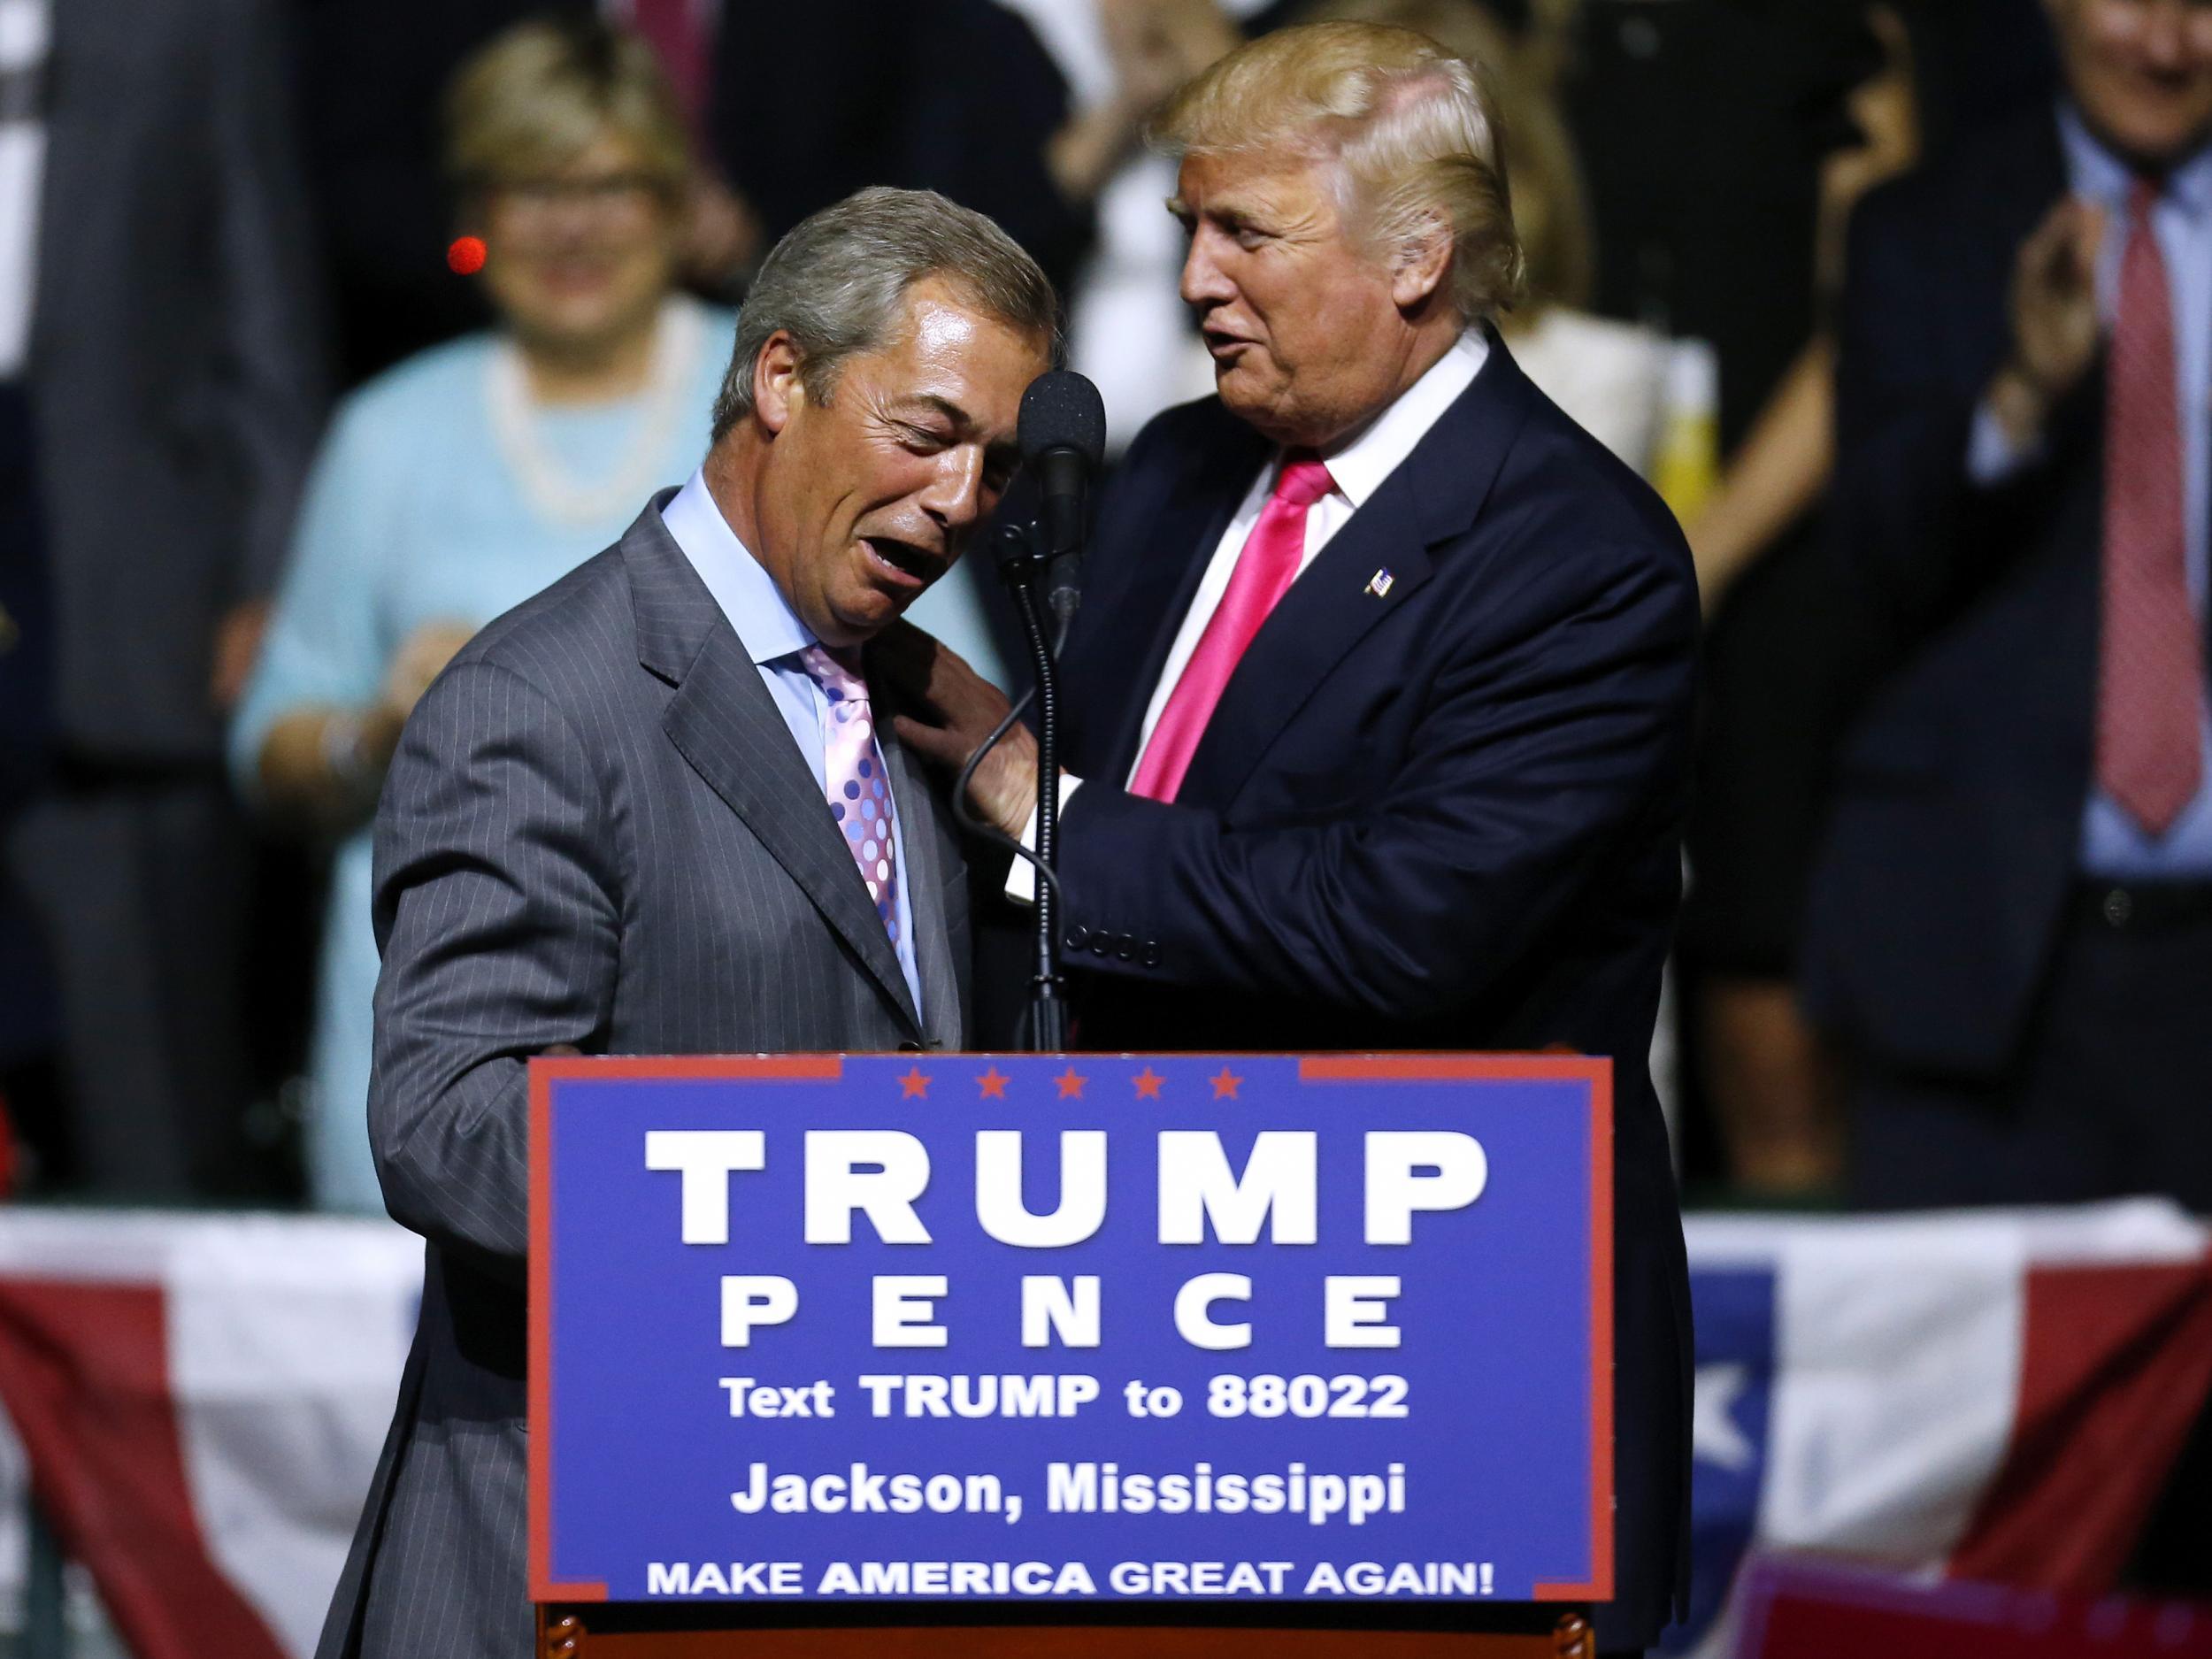 It recently emerged Mr Farage had been secretly advising the Trump campaign